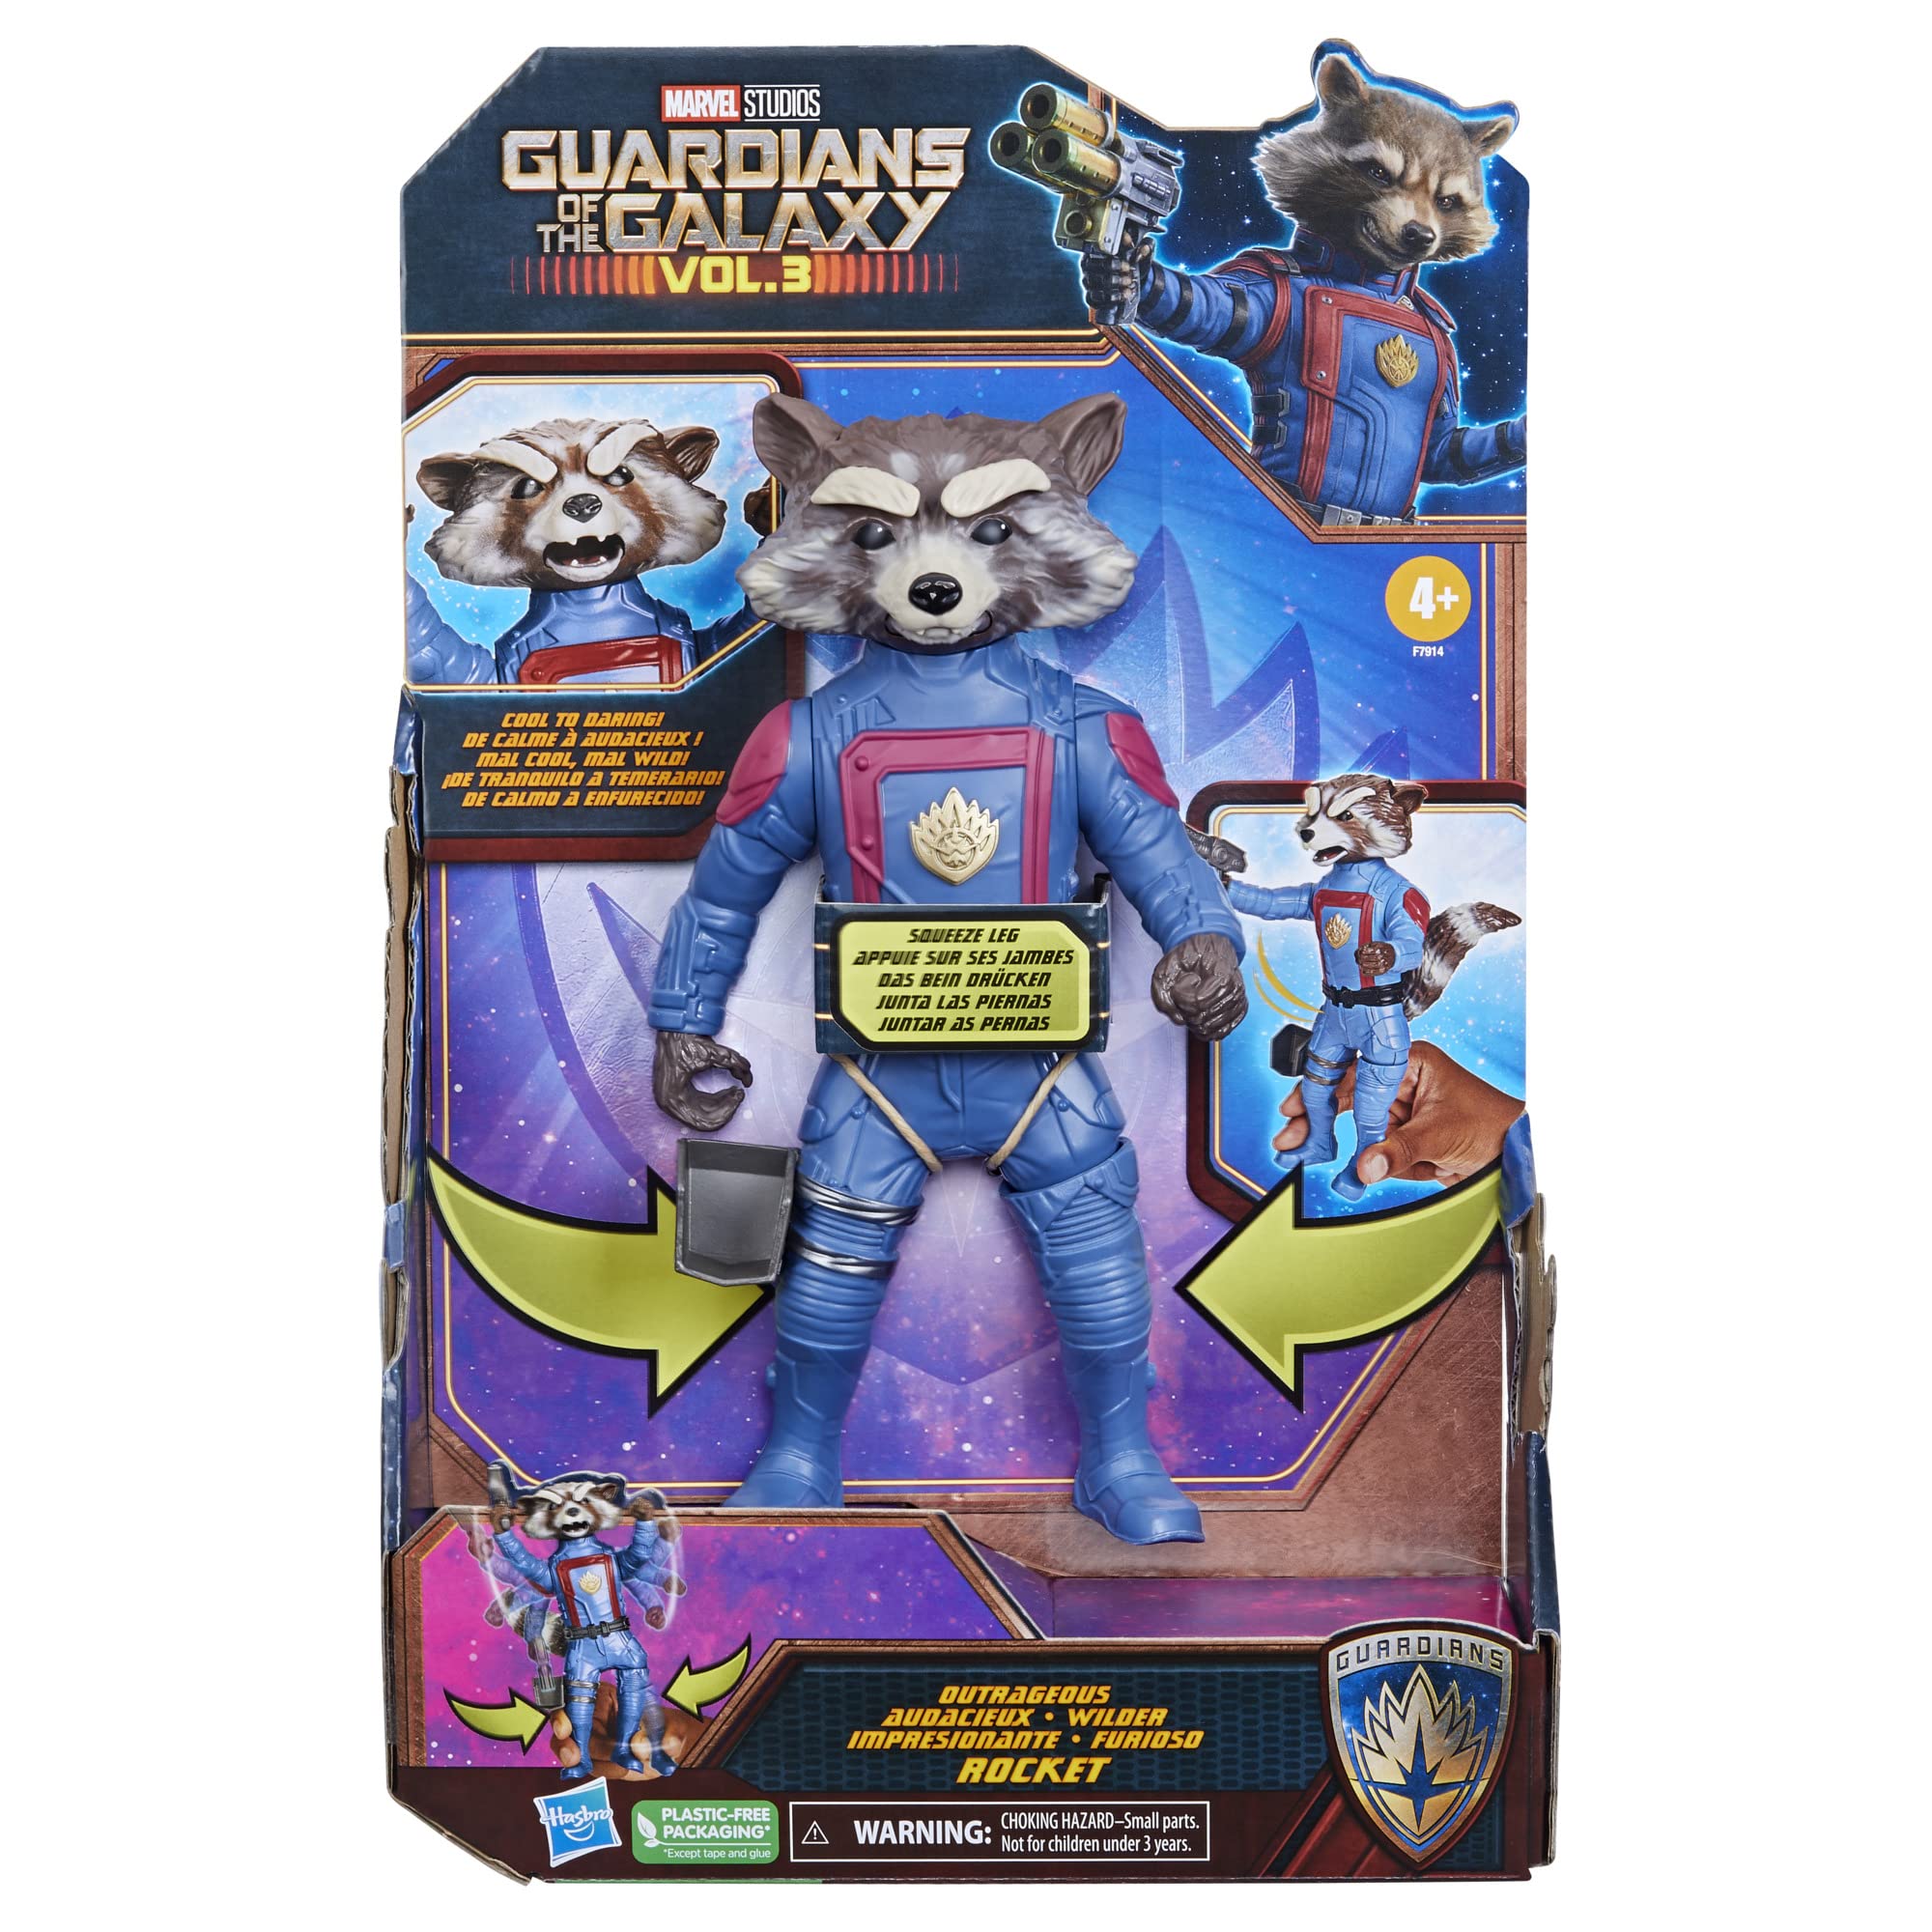 Marvel Studios’ Guardians of The Galaxy Vol. 3 Rocket Action Figure, Super Hero Toys for Kids Ages 4 and Up, 8-Inch-Scale Action Figure